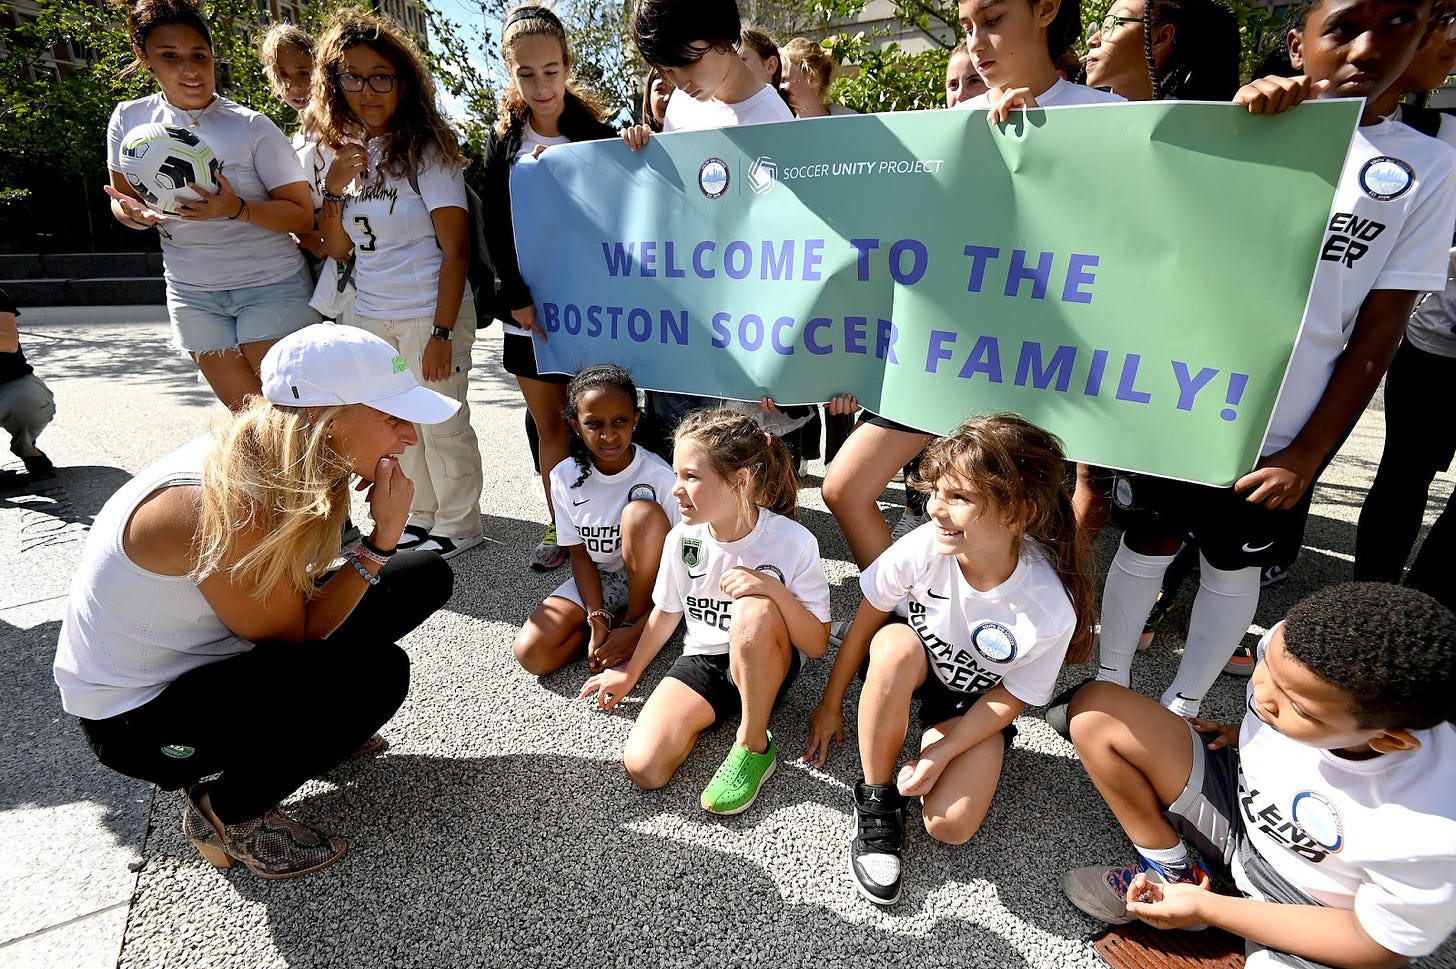 Christine Lilly kneels down to speak with young children wearing South End Soccer shirts while others hold a banner that reads "Welcome to the Boston soccer family!"